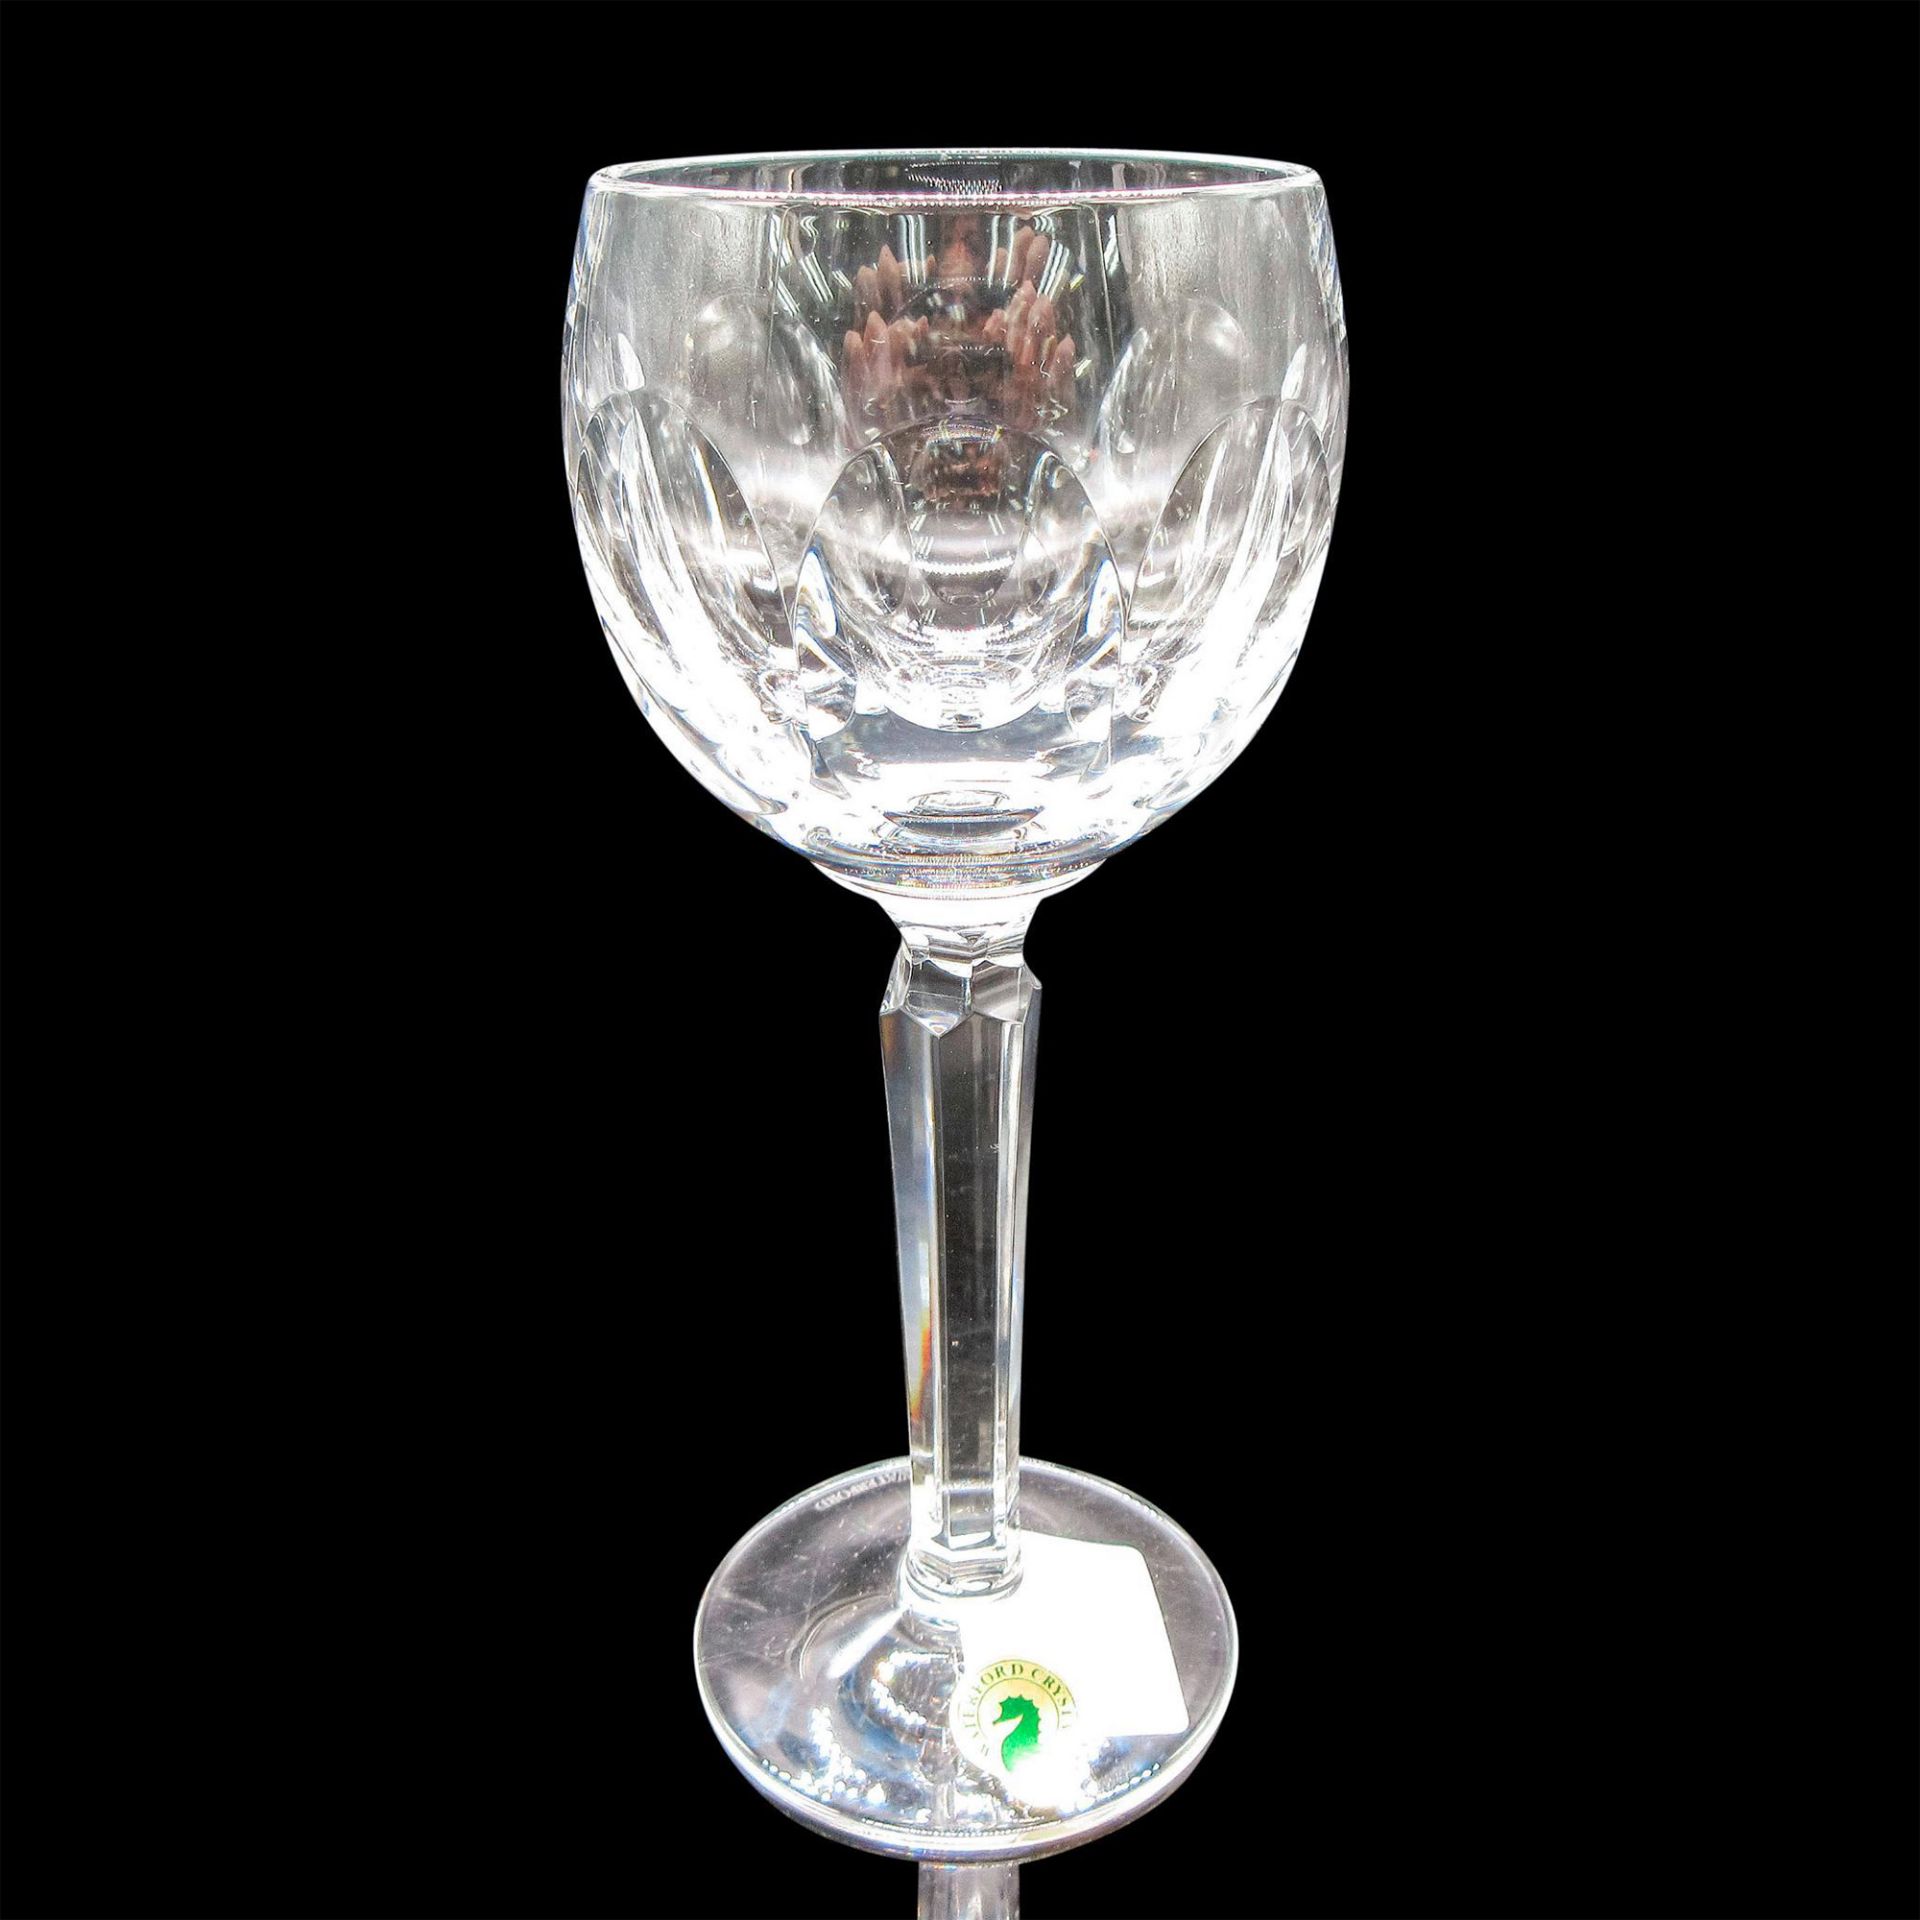 2pc Waterford Crystal Hock Wine Glasses, Sheila - Image 9 of 9